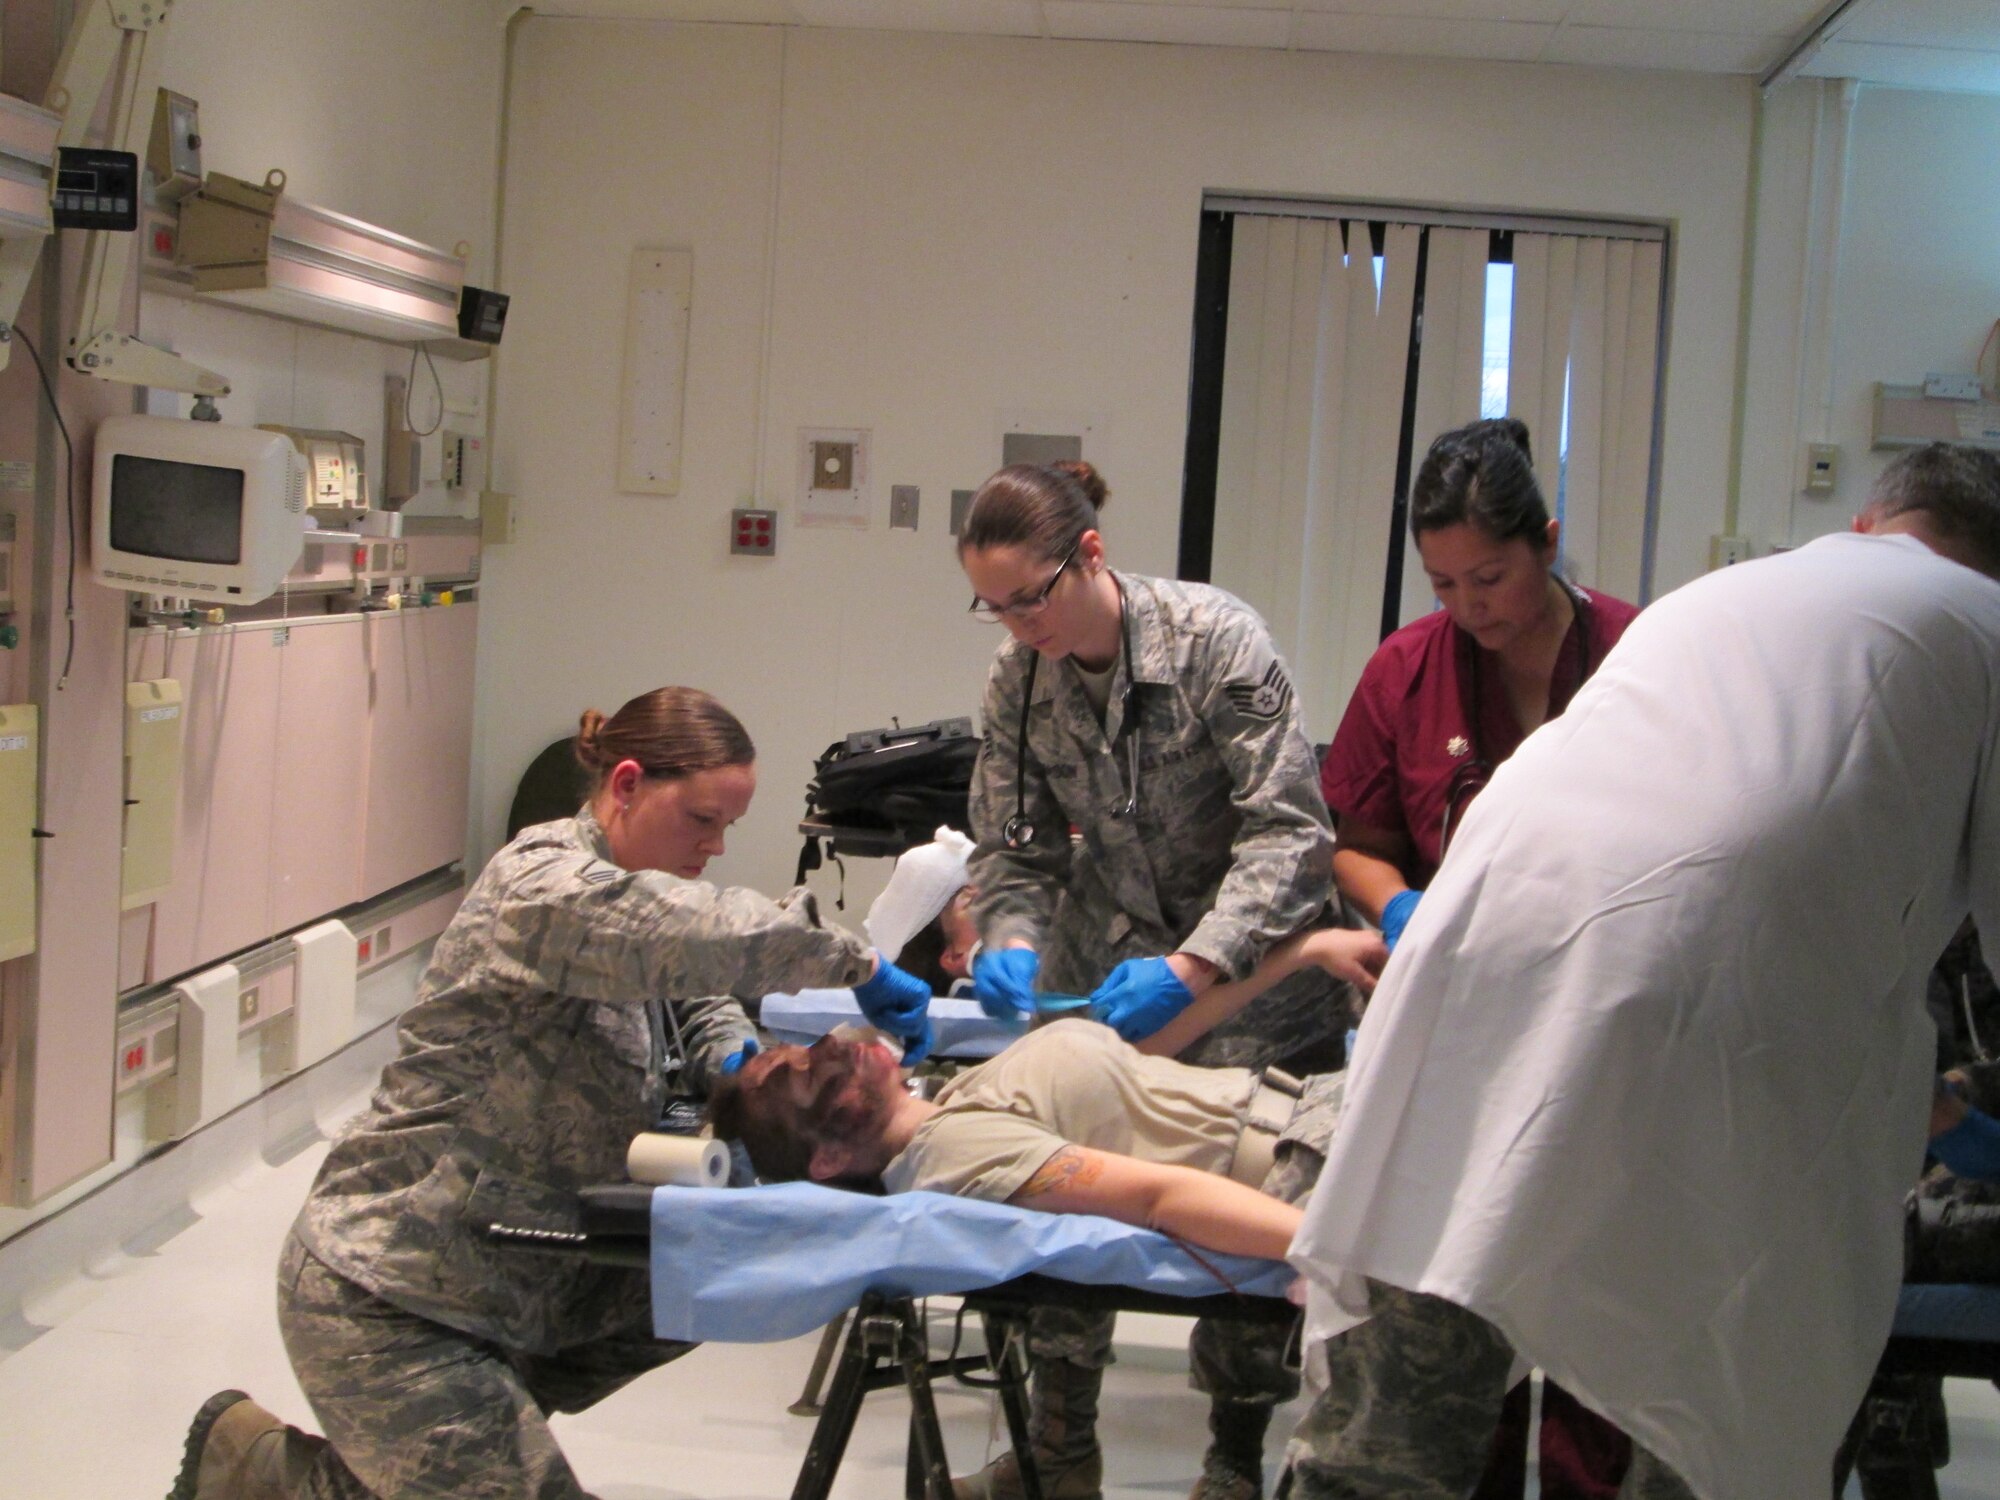 Master Sgt. Erica Jasper (left), Staff Sgt. Caitlyn Thomason and Maj. Marlo Repeta provide care for a simulated trauma victim during a training held at Joint Base Andrews January 10, 2013. The training is to ensure the team is ready to be a part of the 57th Presidential Inauguration as a medical response unit. The team is from the 79th Medical Wing. Jasper is and emergent care clinic medical technician, Thomason is a medical technician and Repeta is a nurse. (U.S. Air Force Photo/Melanie Moore)